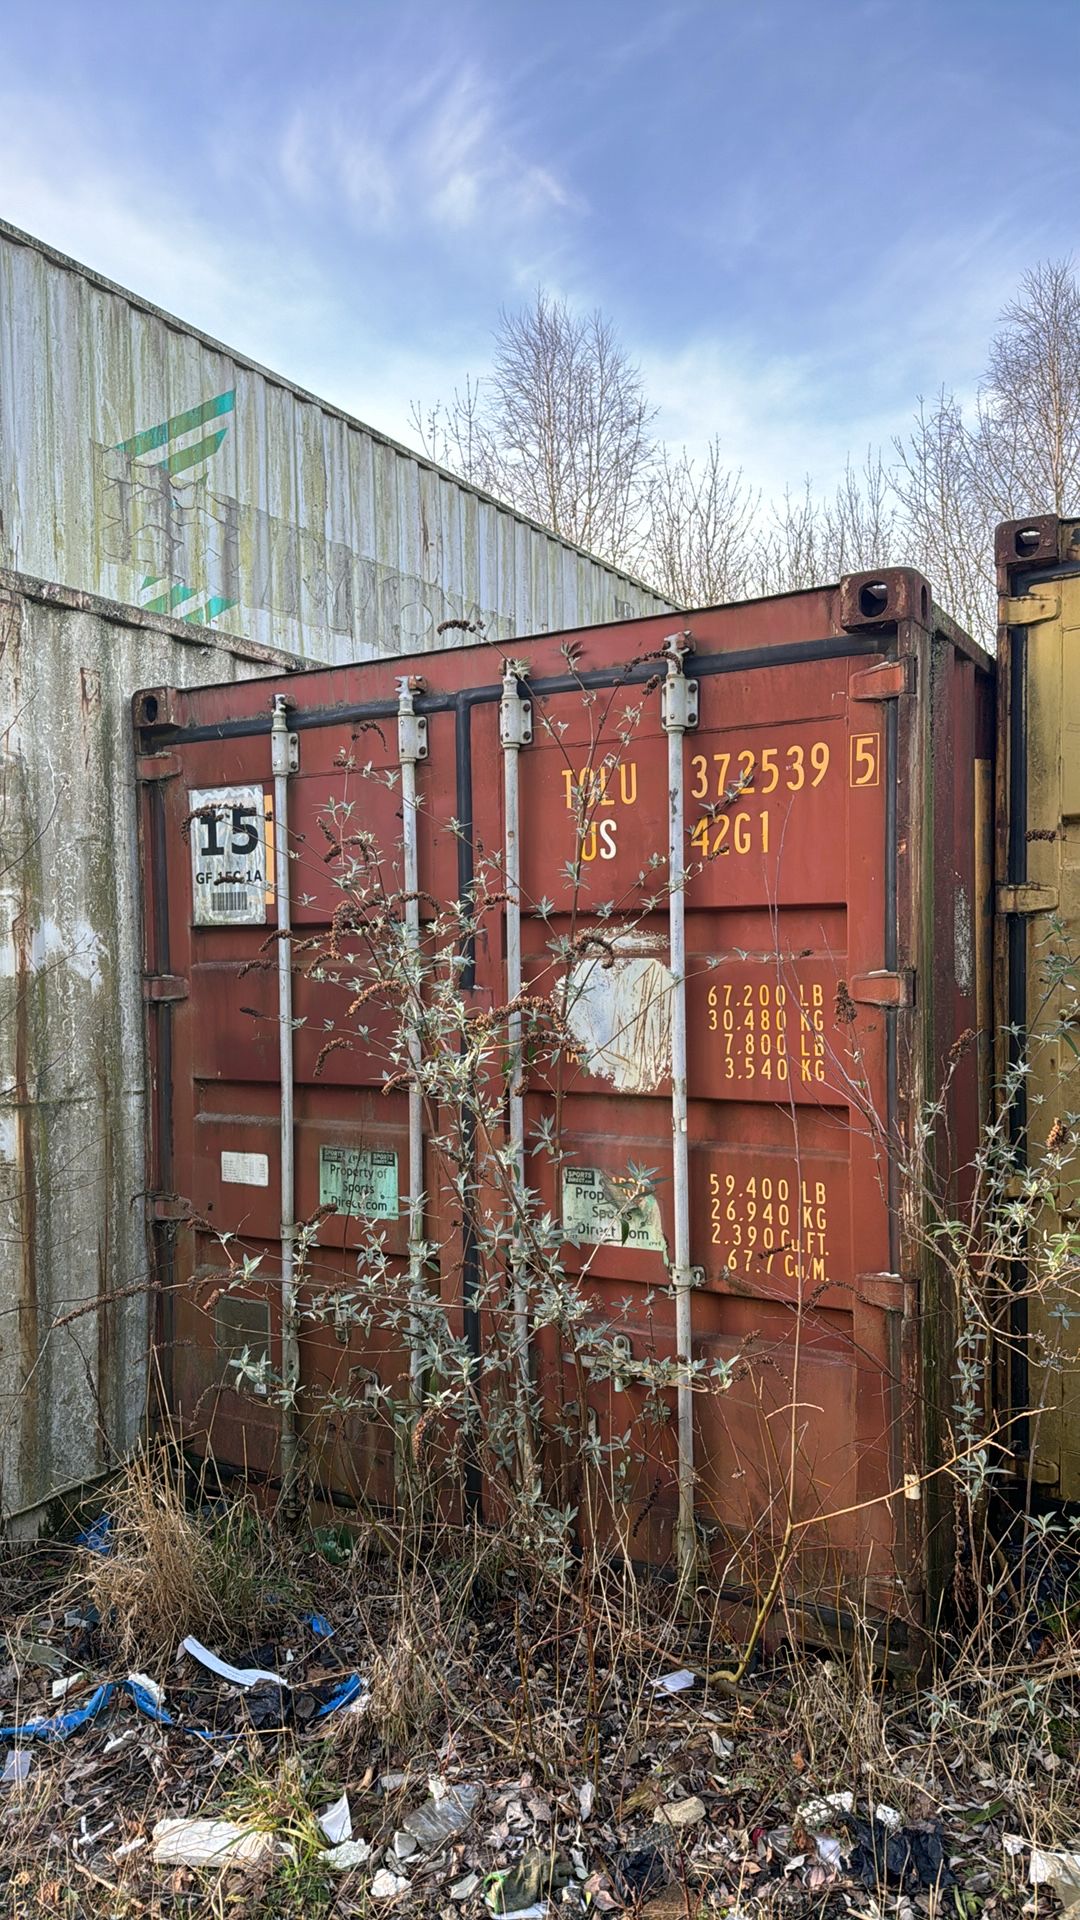 Shipping container, 52 (TOLU372539542G1) - Image 2 of 2